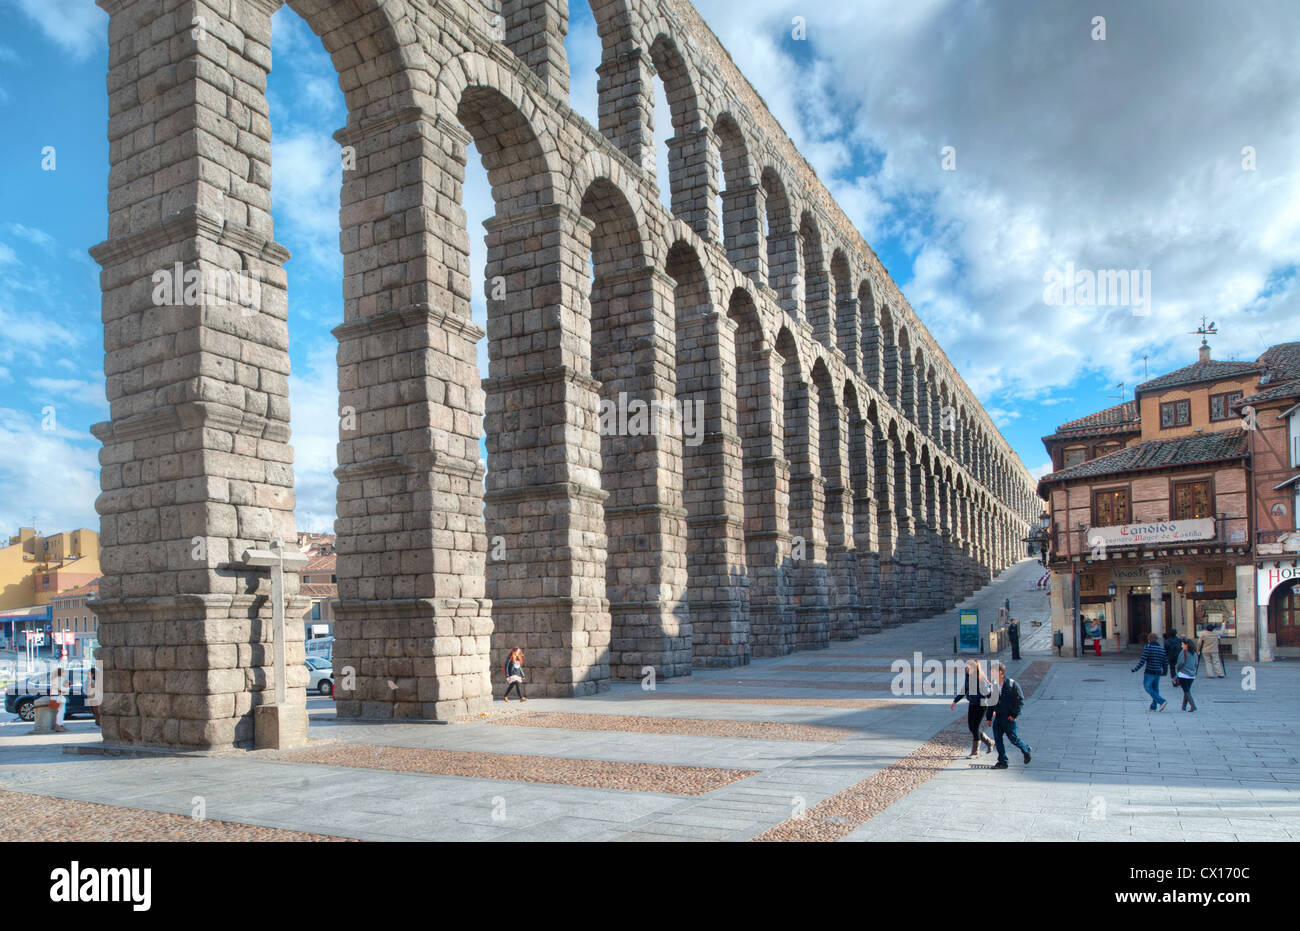 The great Roman aqueduct in Segovia, northern Spain, one of the best-preserved ancient monuments left on the Iberian Peninsula Stock Photo